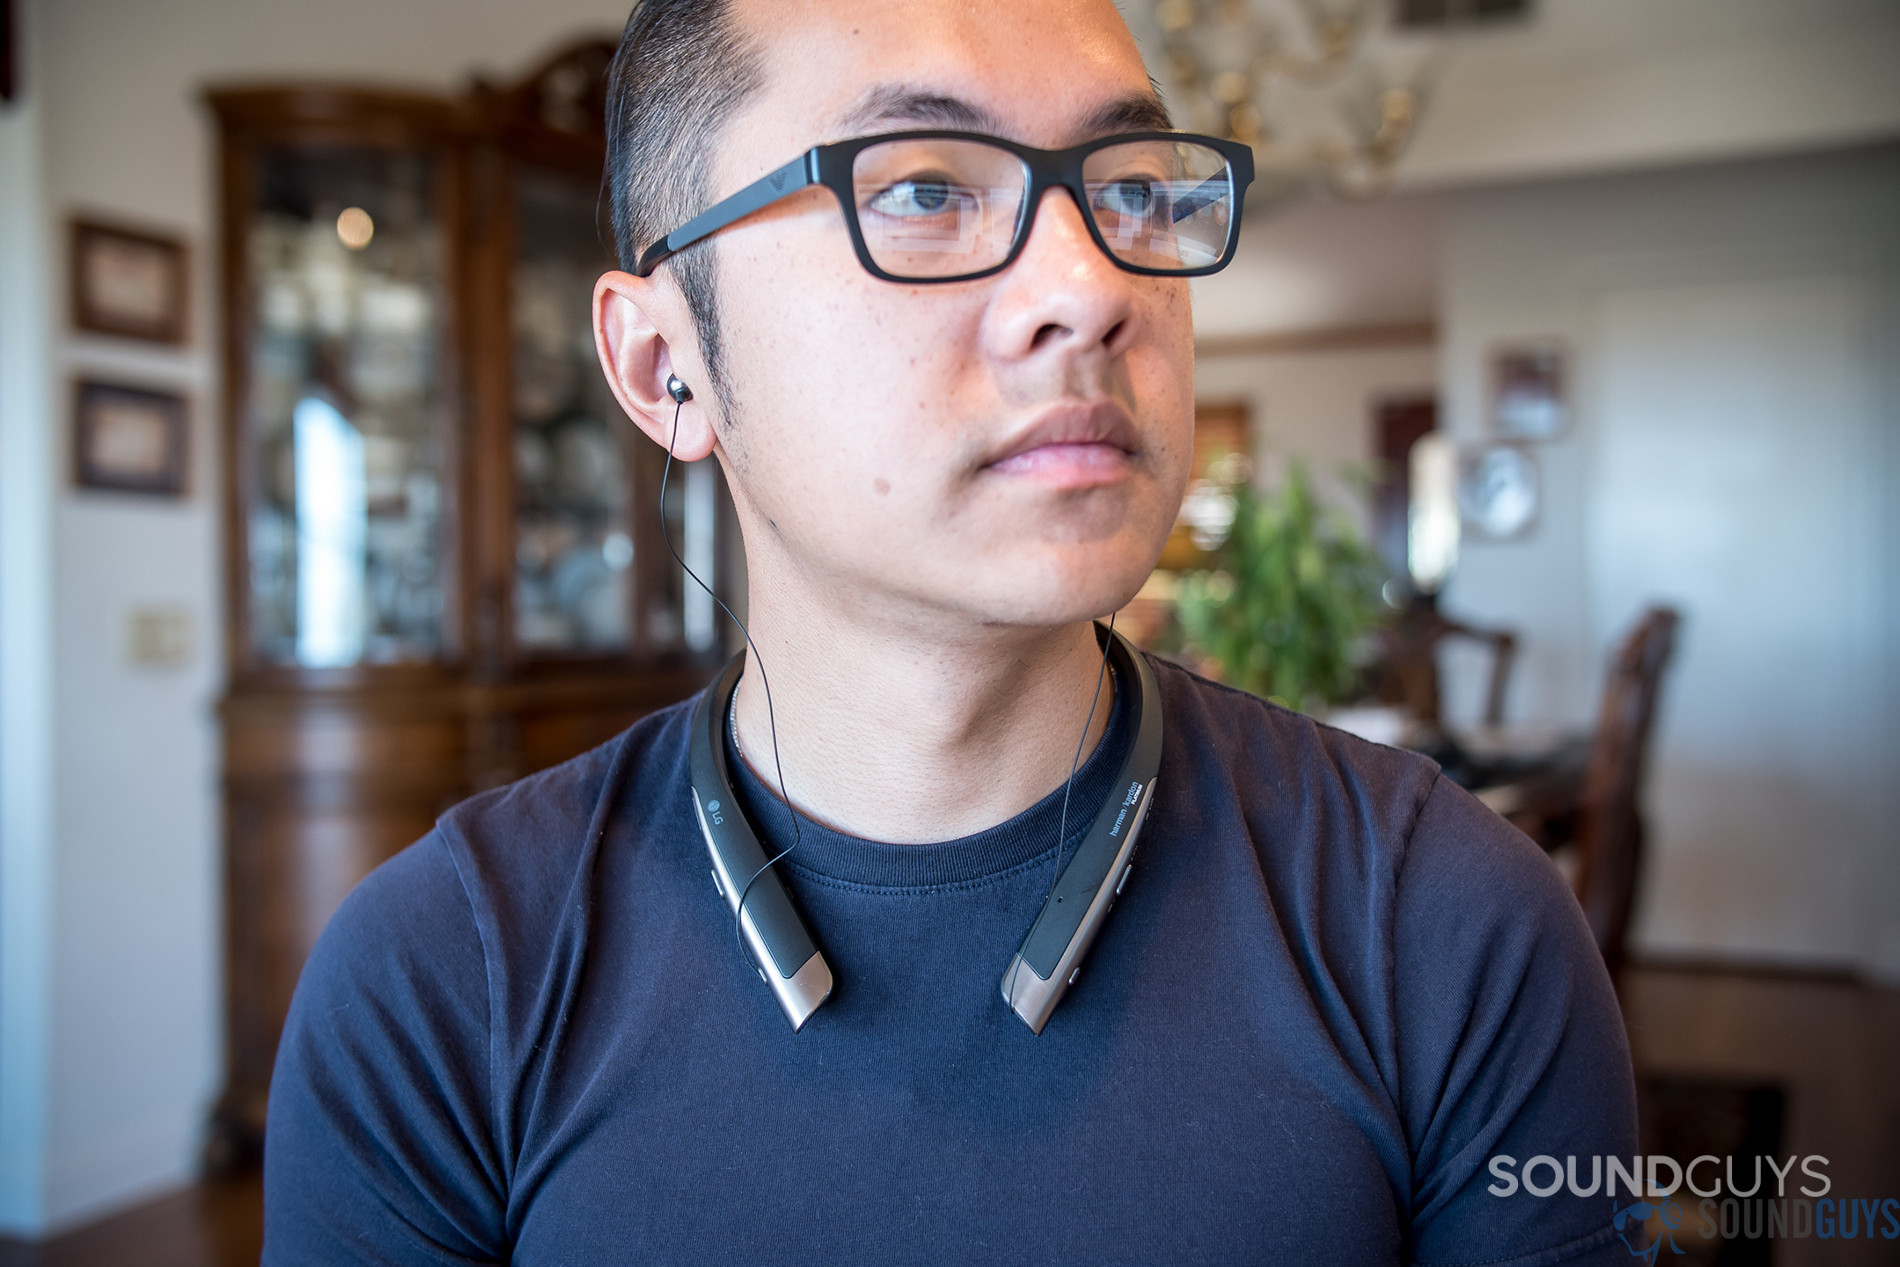 A person wears LG Tone Platinum neckband earbuds.